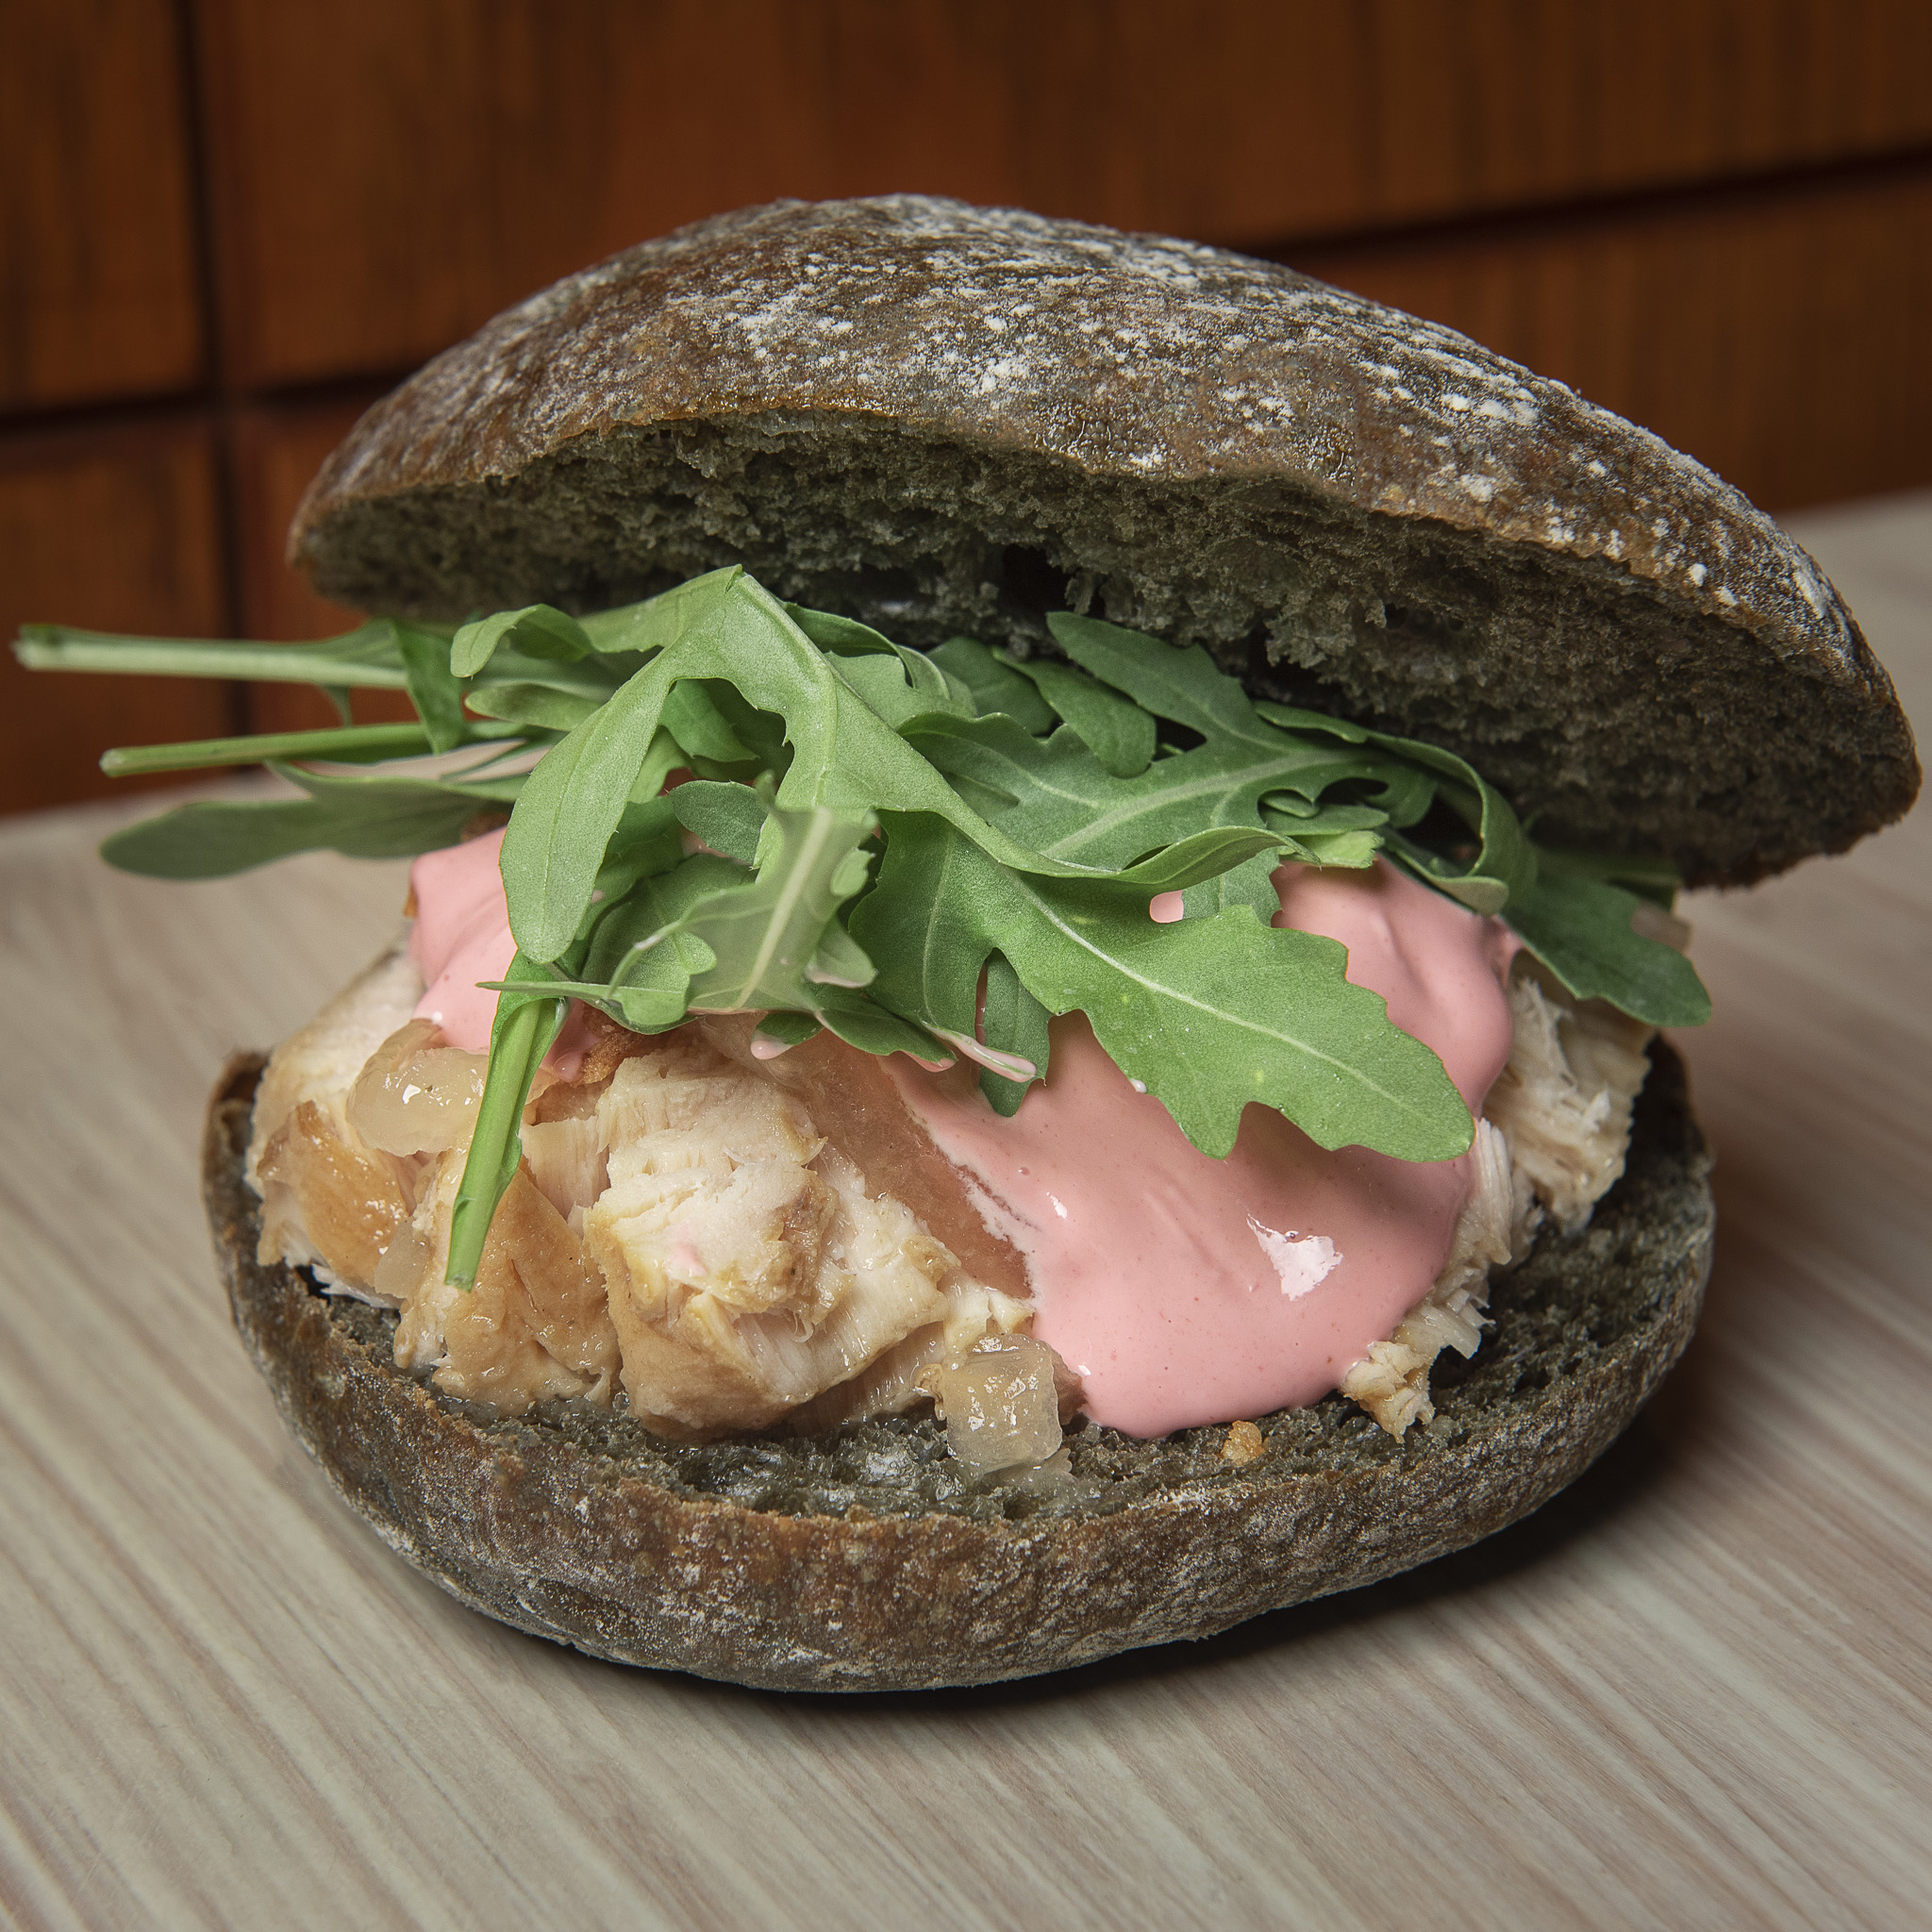 Pickled tuna sandwich with beet mayonnaise and arugula